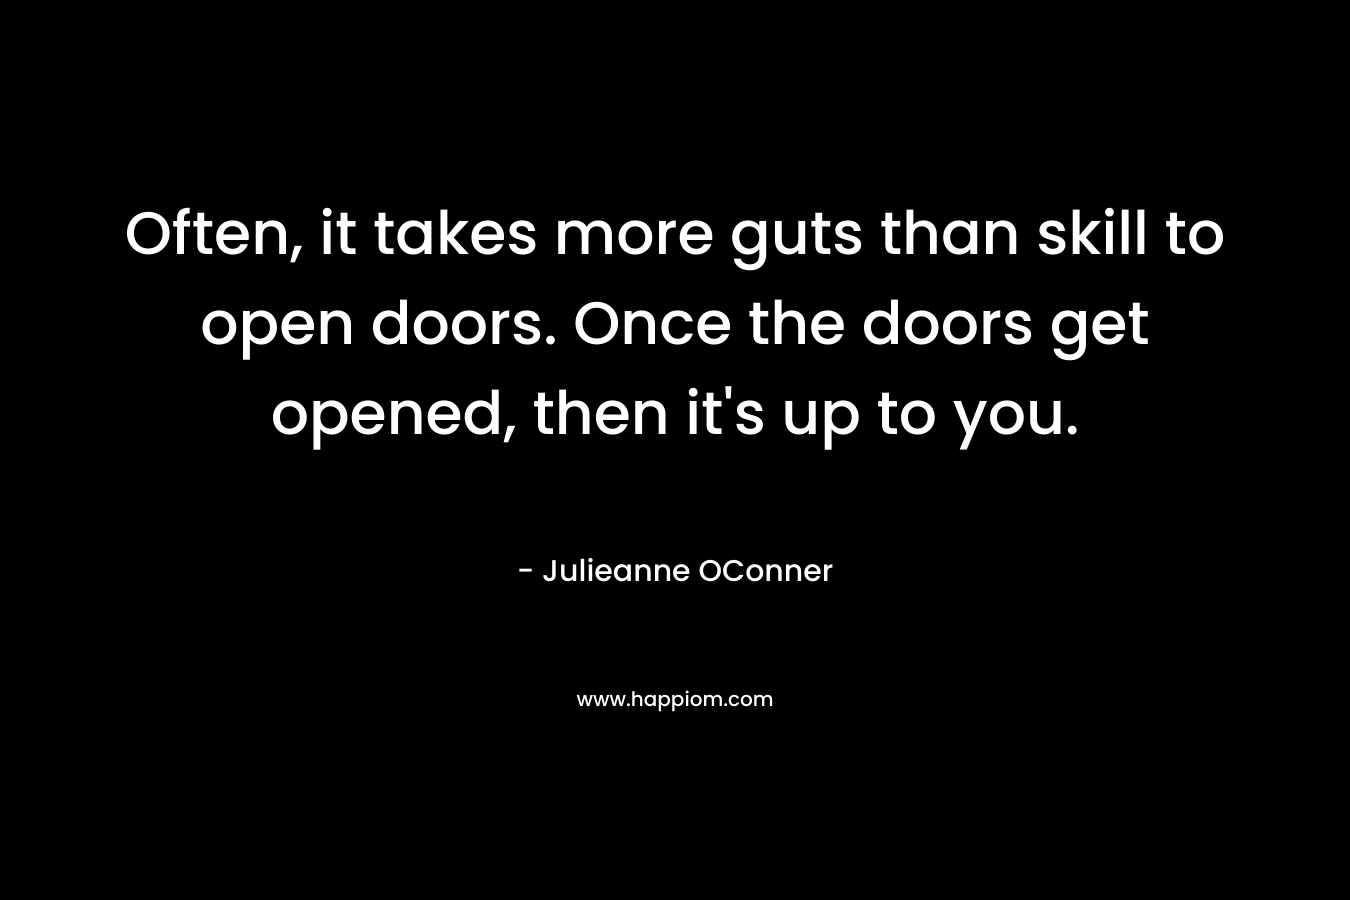 Often, it takes more guts than skill to open doors. Once the doors get opened, then it's up to you.